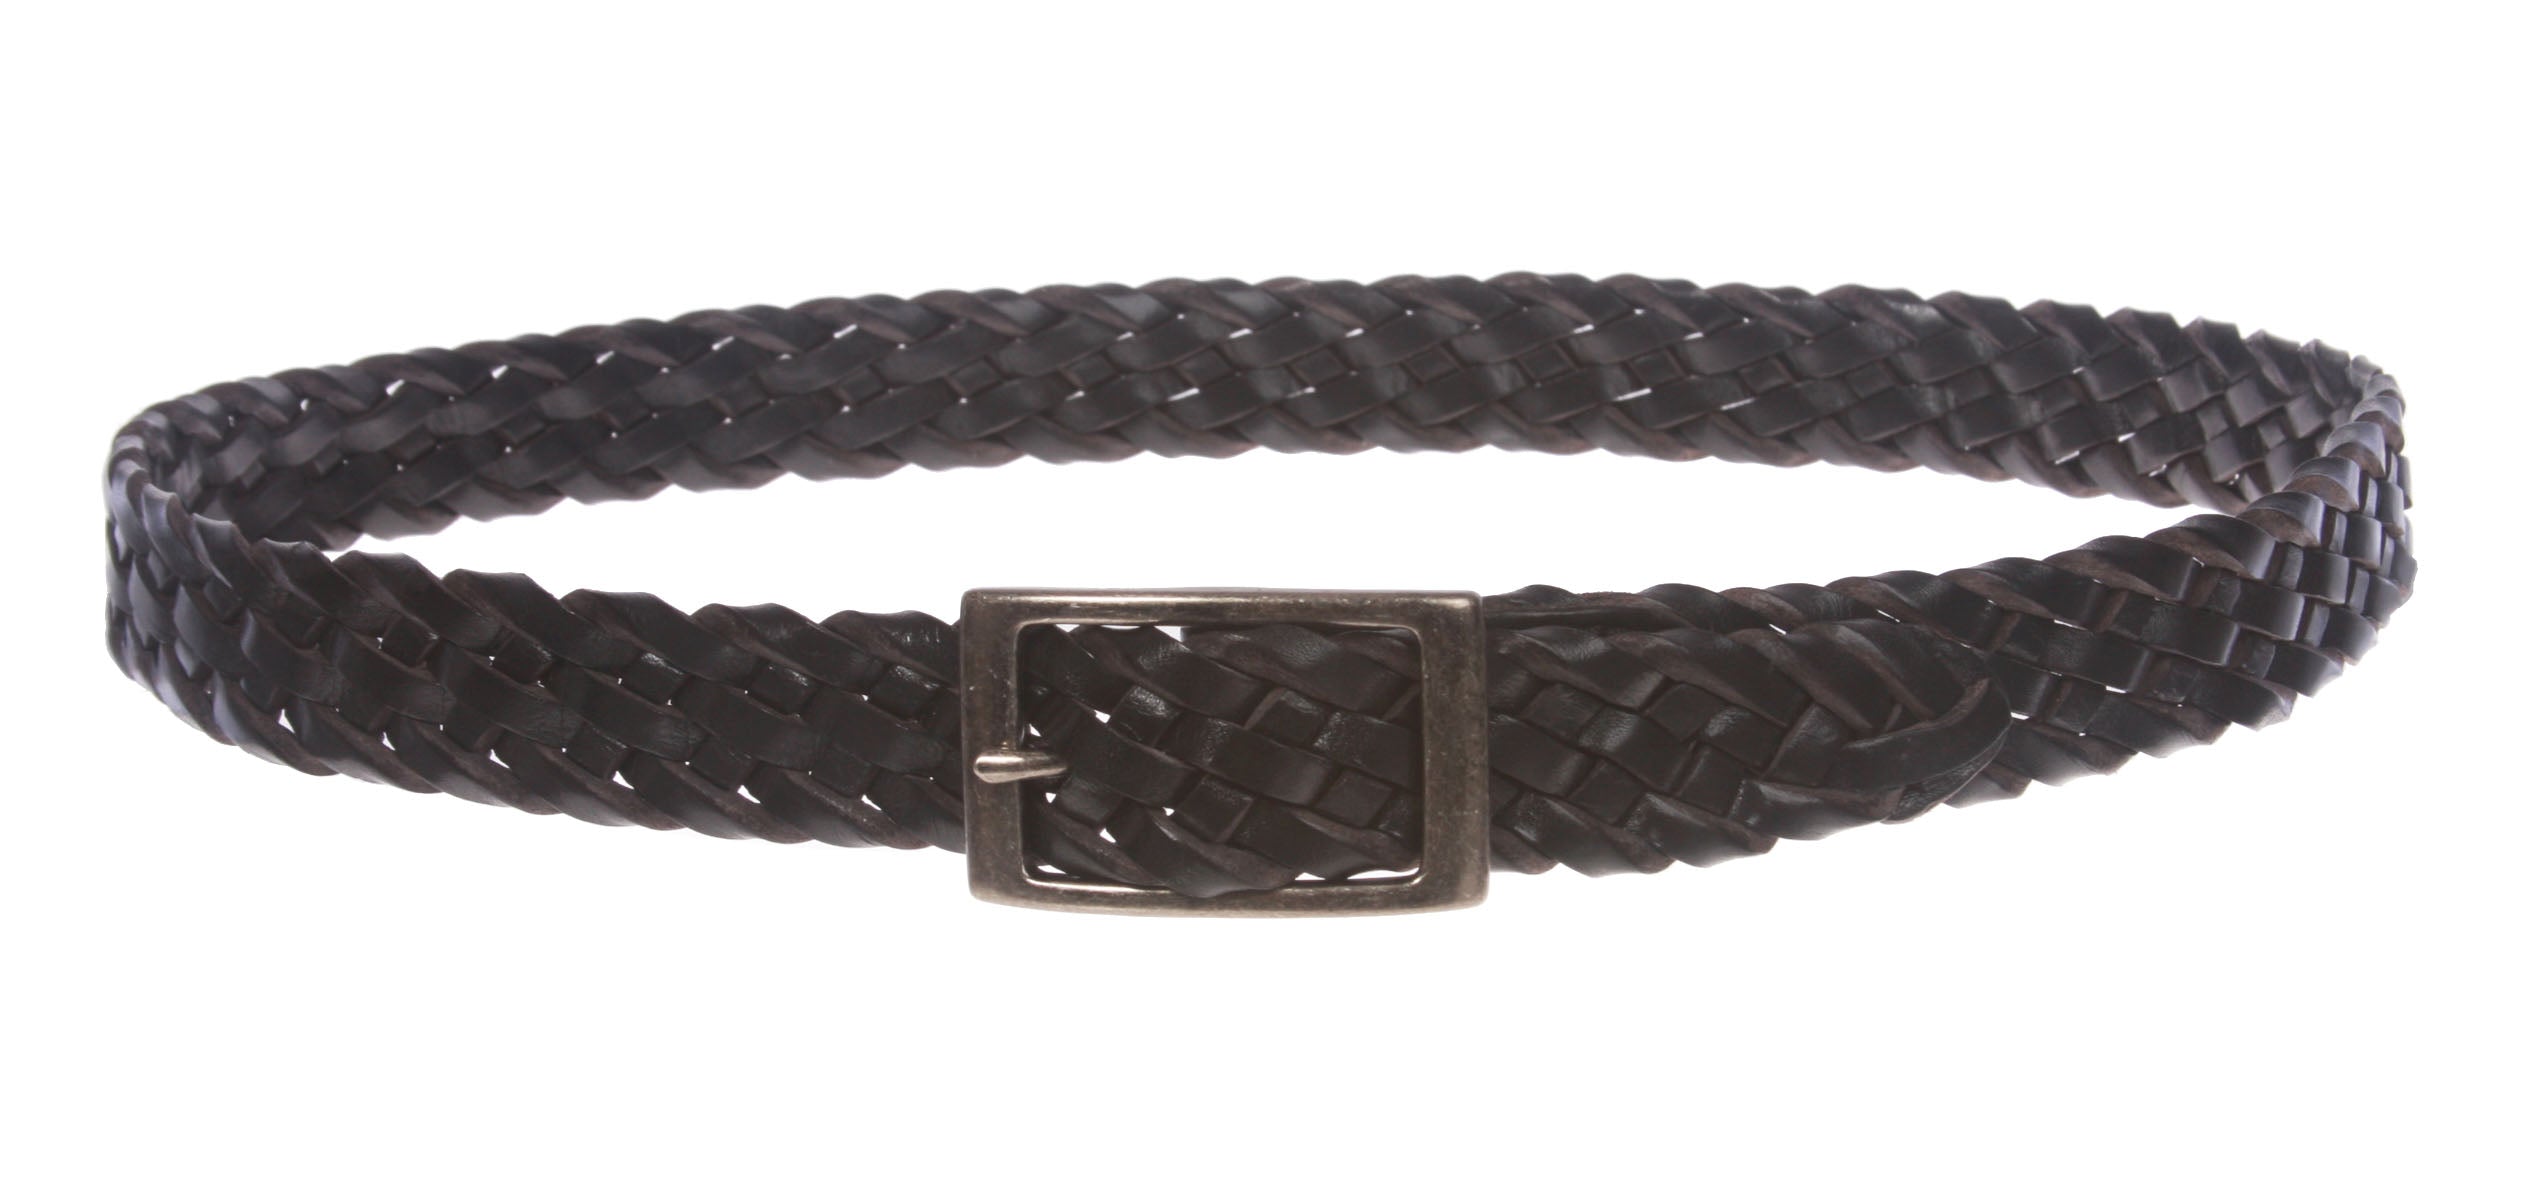 1 1/4" Braided Woven Leather Belt